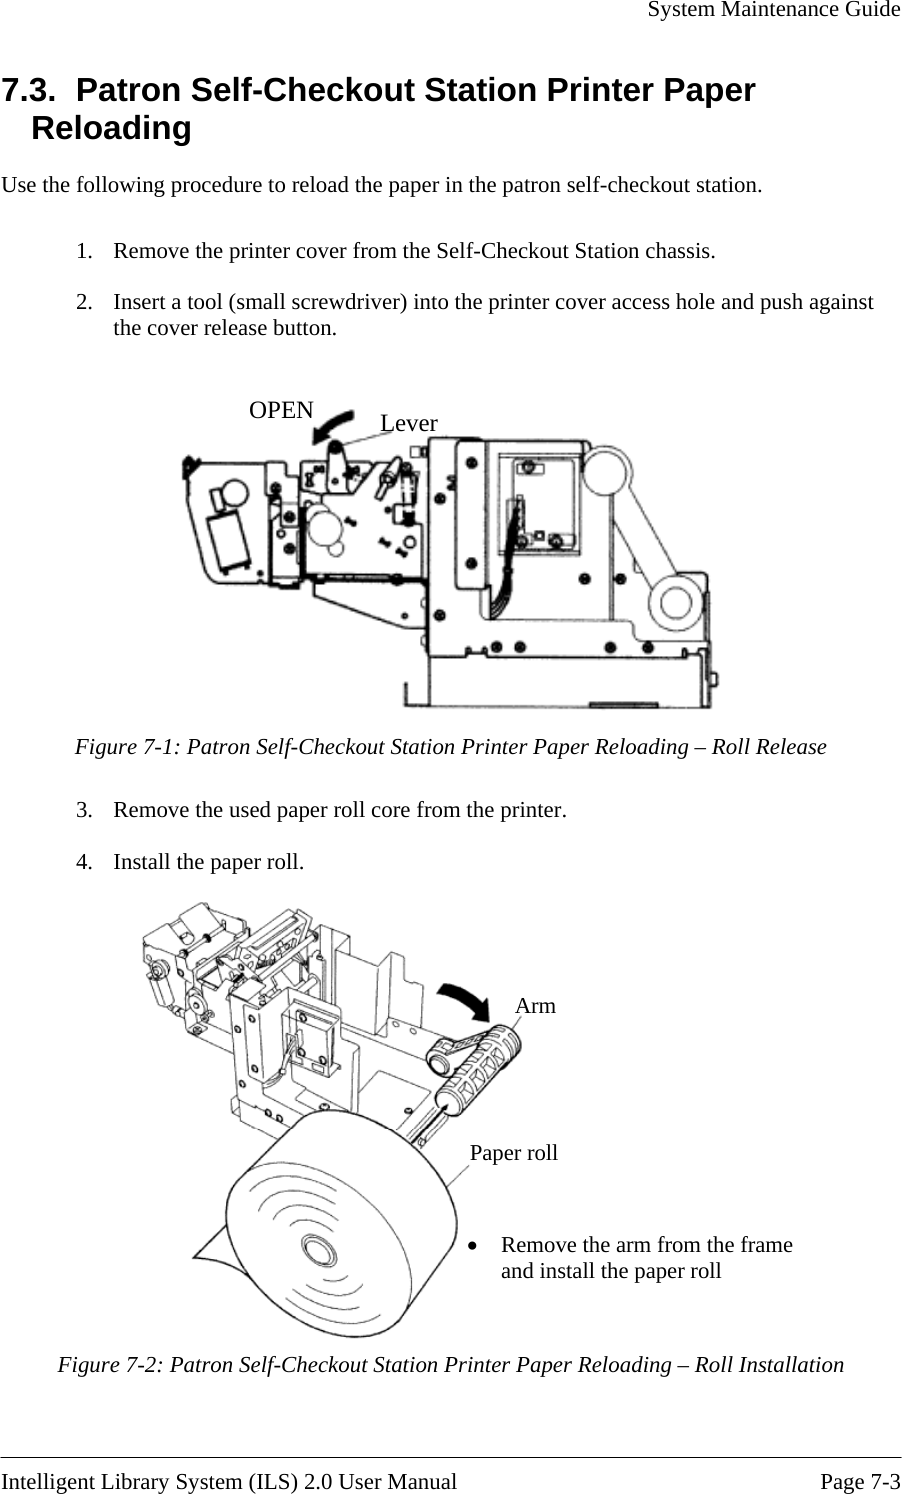     System Maintenance Guide    Intelligent Library System (ILS) 2.0 User Manual  Page 7-3 7.3.  Patron Self-Checkout Station Printer Paper Reloading Use the following procedure to reload the paper in the patron self-checkout station.  1.  Remove the printer cover from the Self-Checkout Station chassis. 2.  Insert a tool (small screwdriver) into the printer cover access hole and push against the cover release button.  OPEN Lever   Figure 7-1: Patron Self-Checkout Station Printer Paper Reloading – Roll Release 3.  Remove the used paper roll core from the printer. 4.  Install the paper roll. Arm Paper roll • Remove the arm from the frame and install the paper roll   Figure 7-2: Patron Self-Checkout Station Printer Paper Reloading – Roll Installation 